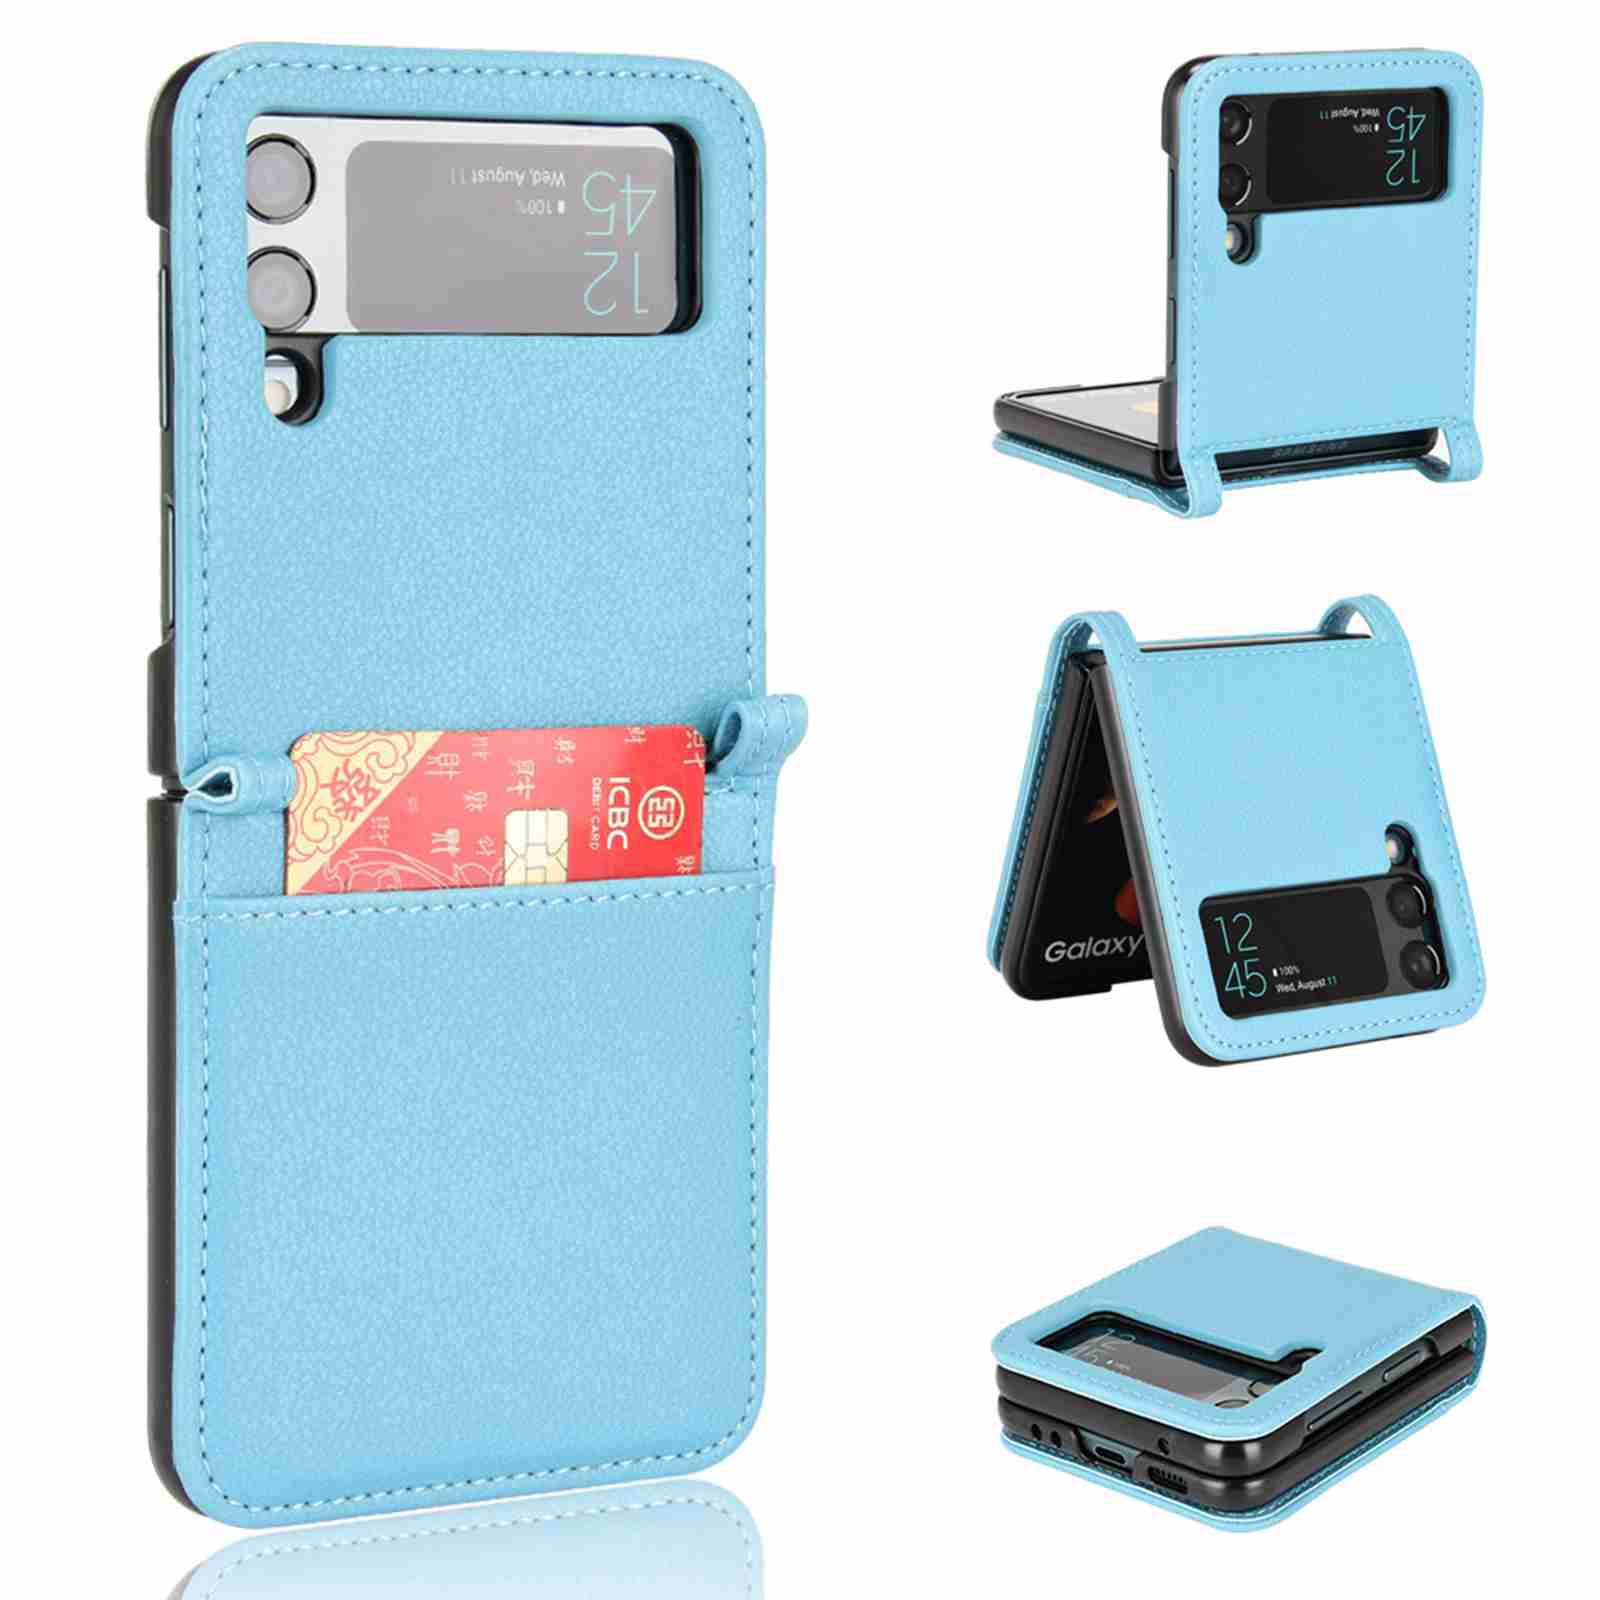 Galaxy Z Flip 3 5g Case,samsung Z Flip 3 Luxury Pu Leather Wallet  Protective Phone Case With Card Slots Pocket Cover Case For Samsung Galaxy  Z Flip 3